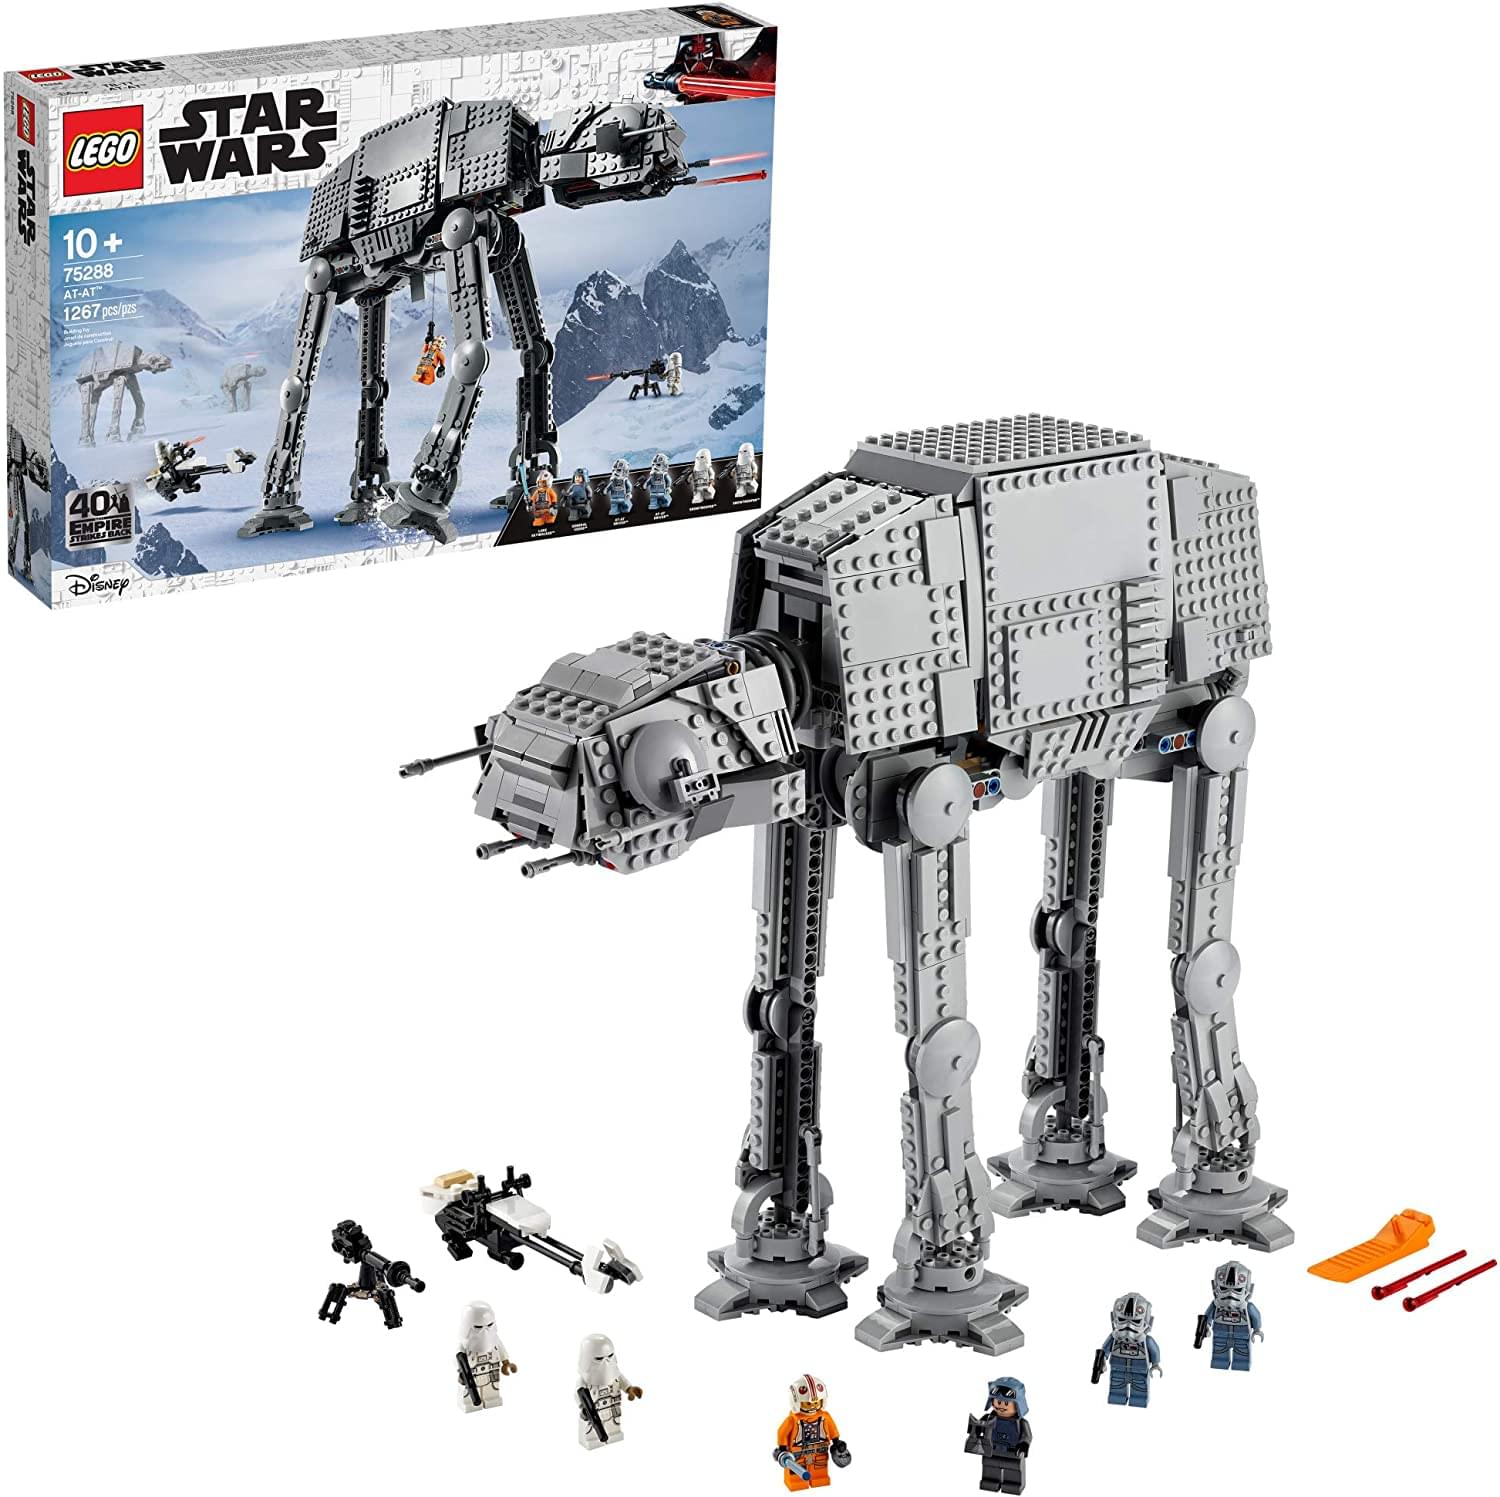 LEGO Star Wars 75288 AT-AT 1267 Piece Building Set